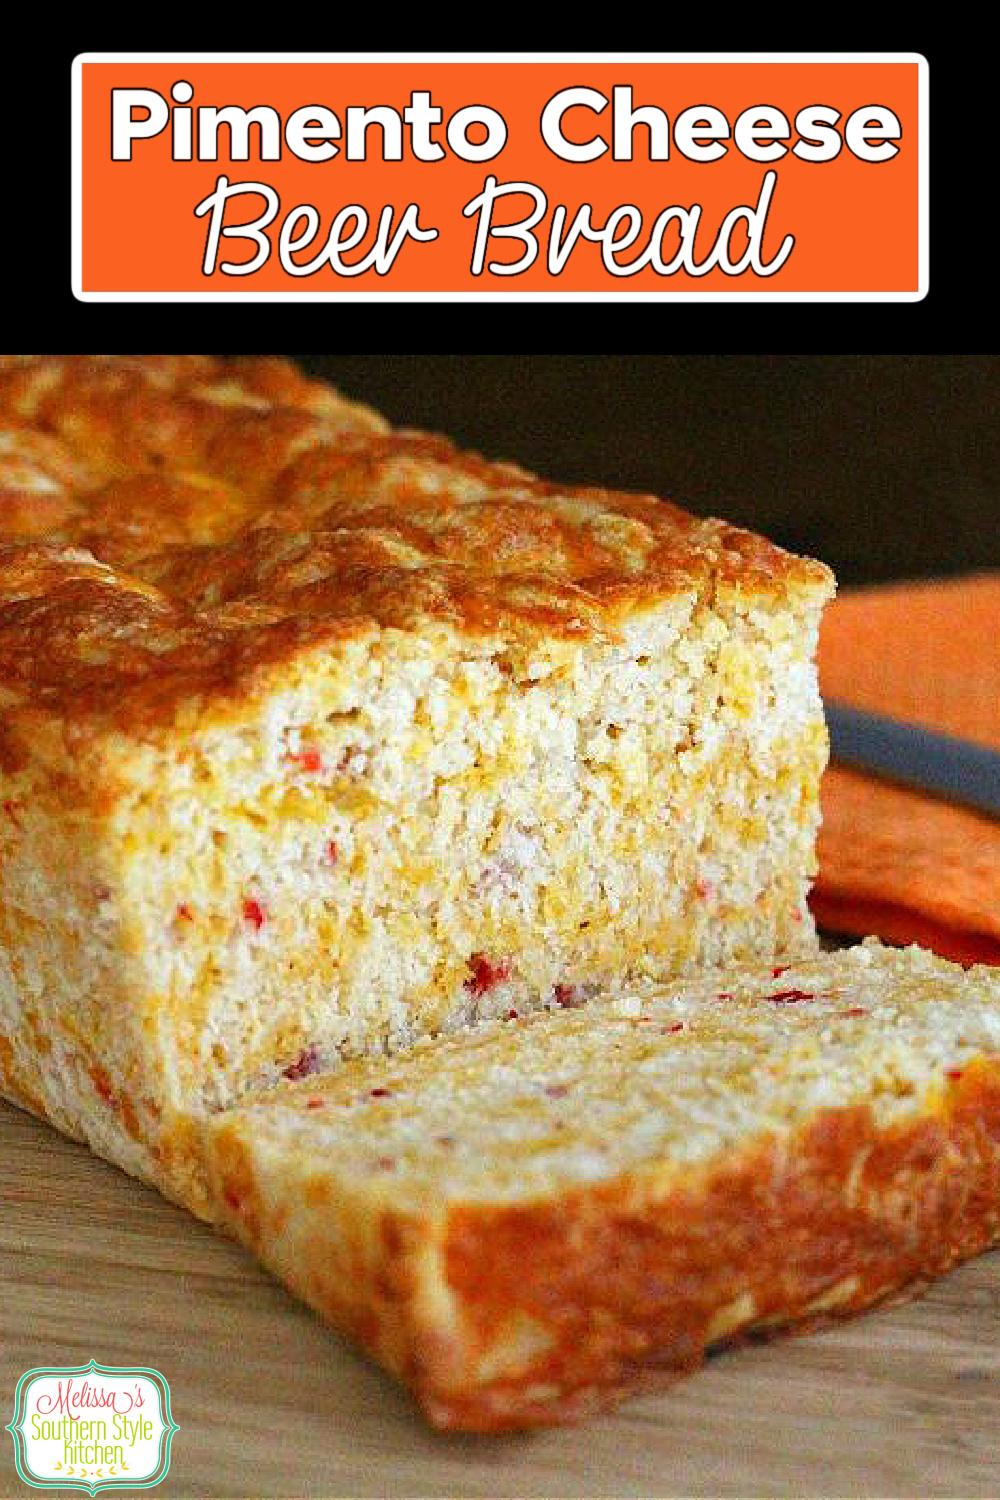 Two favorites collide in this Pimento Cheese Beer Bread #pimentocheese #beerbread #beerbreadrecipes #breadrecipes #soujthernfood #southernrecipes #southernpimentocheese